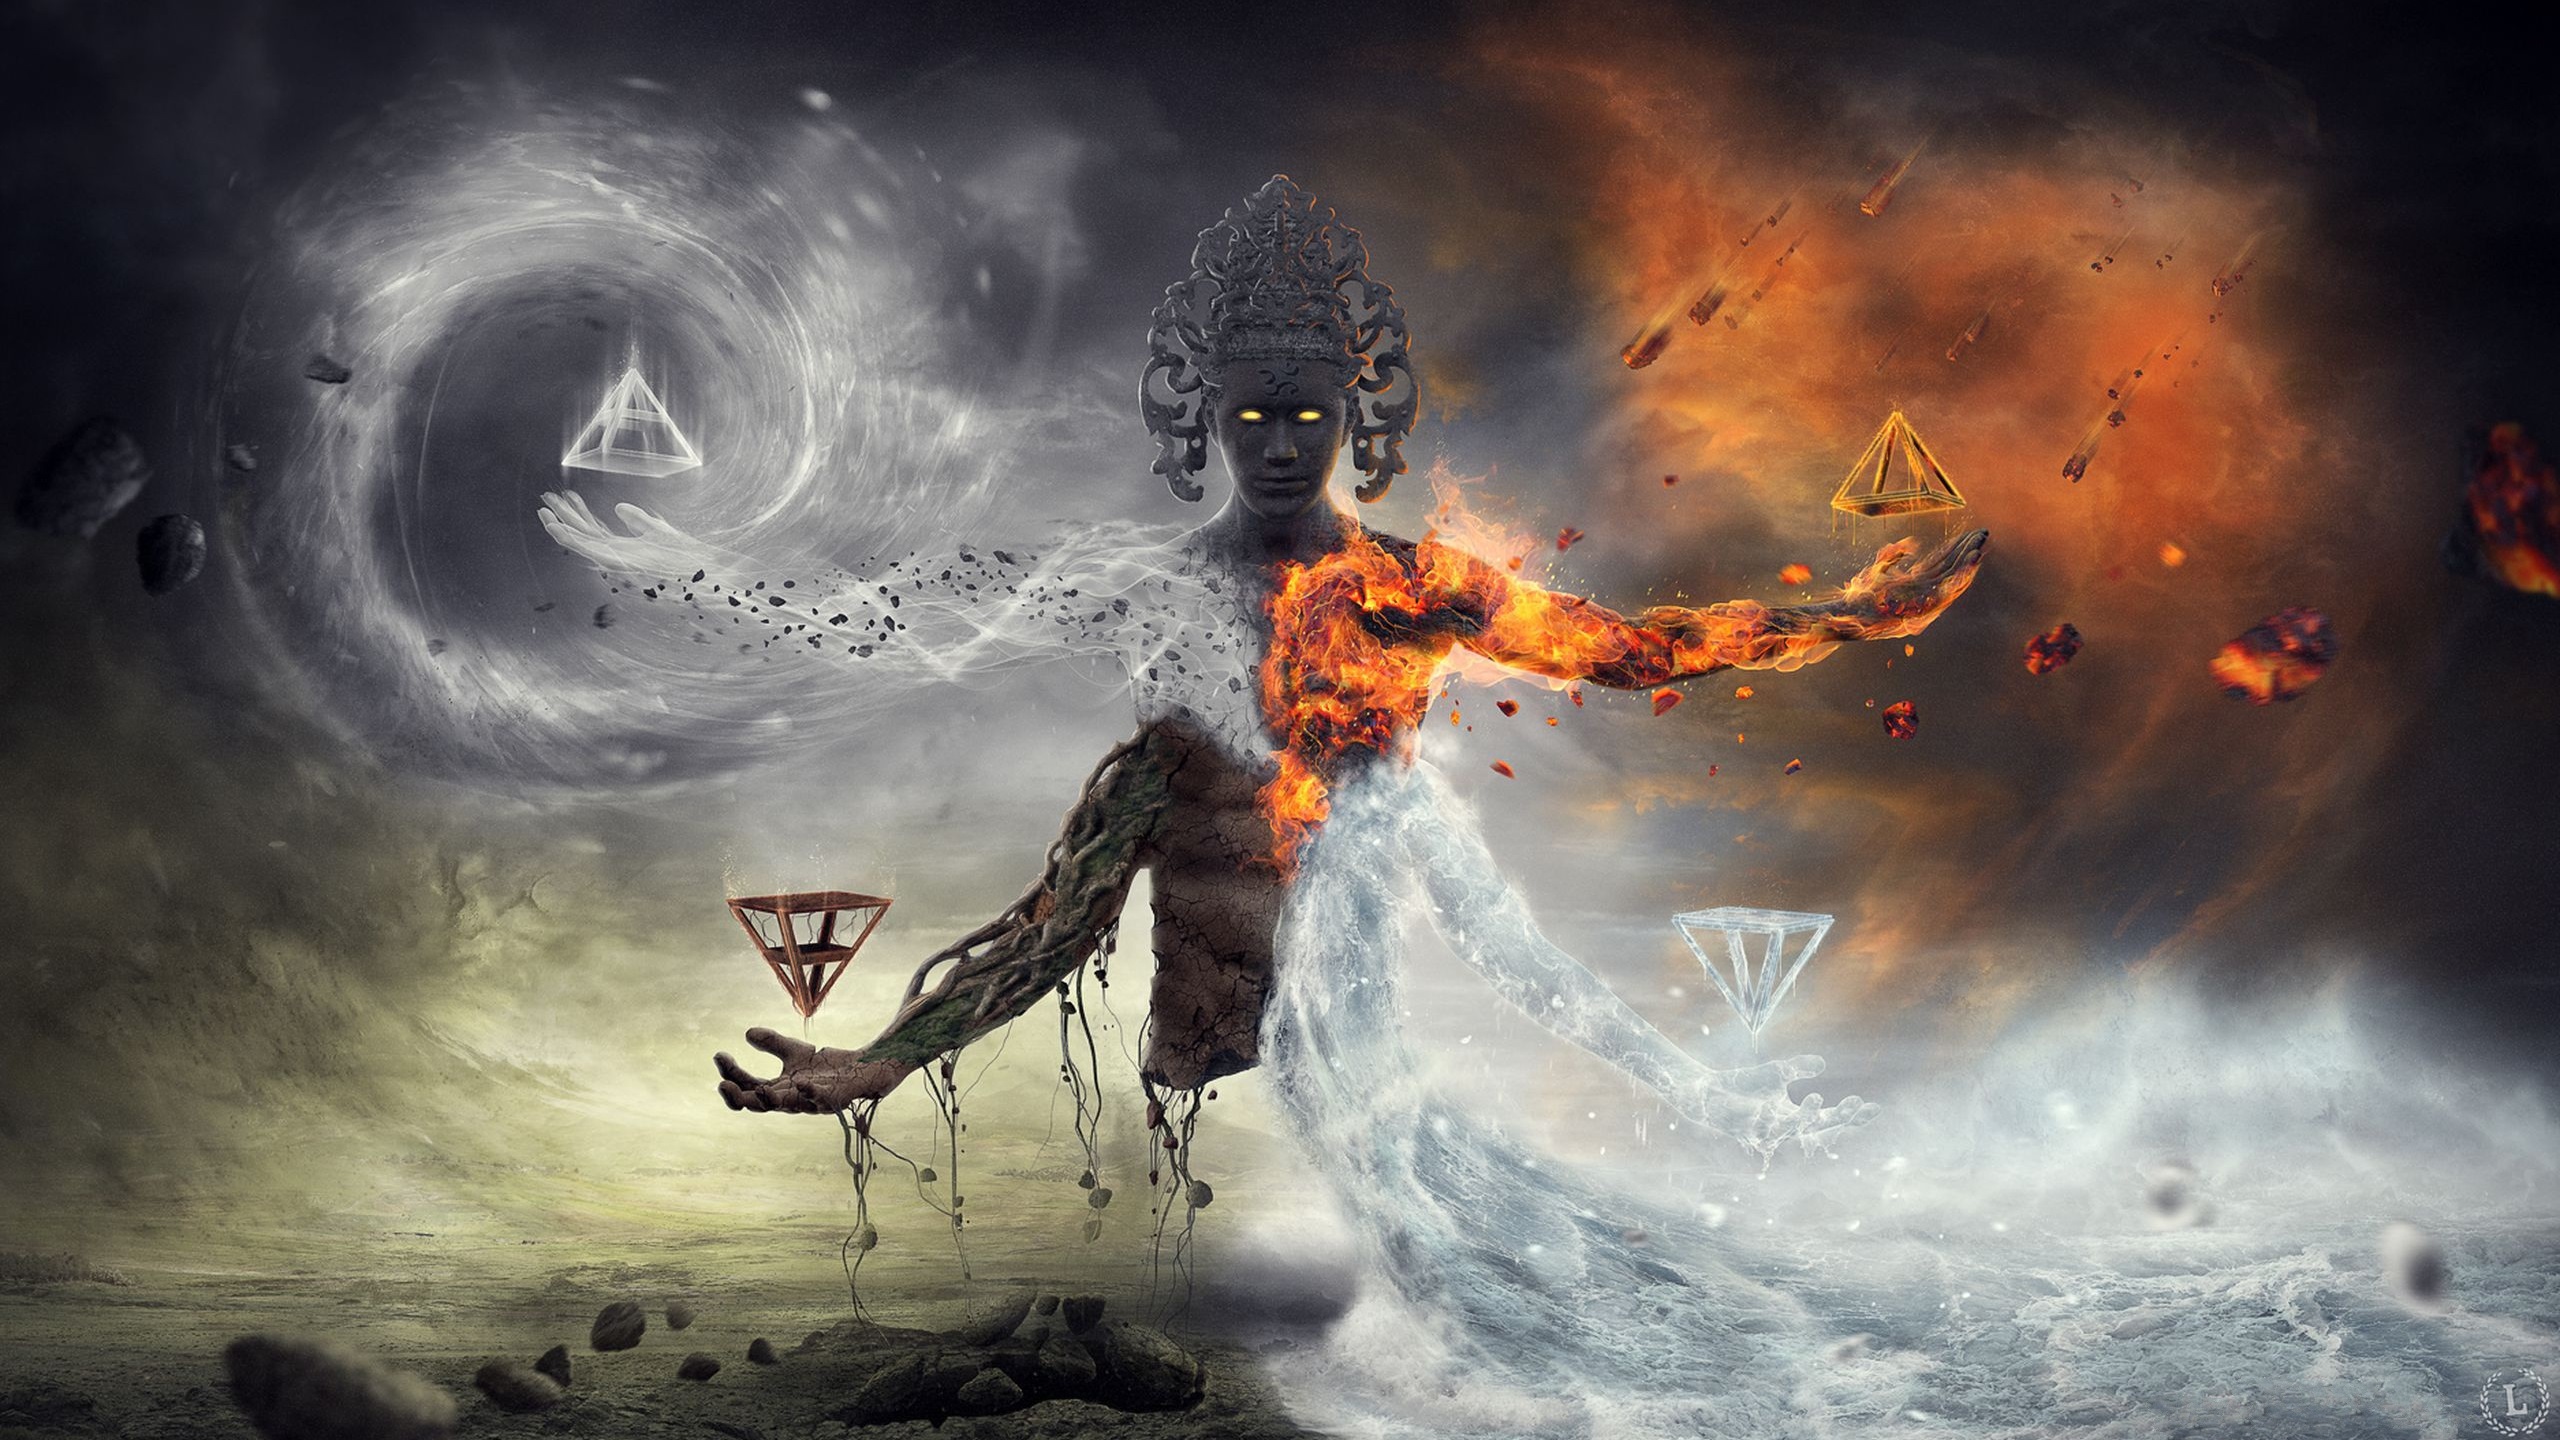 Wallpaper Fantasy art, monster, fire, burning, water 2560x1440 QHD Picture, Image